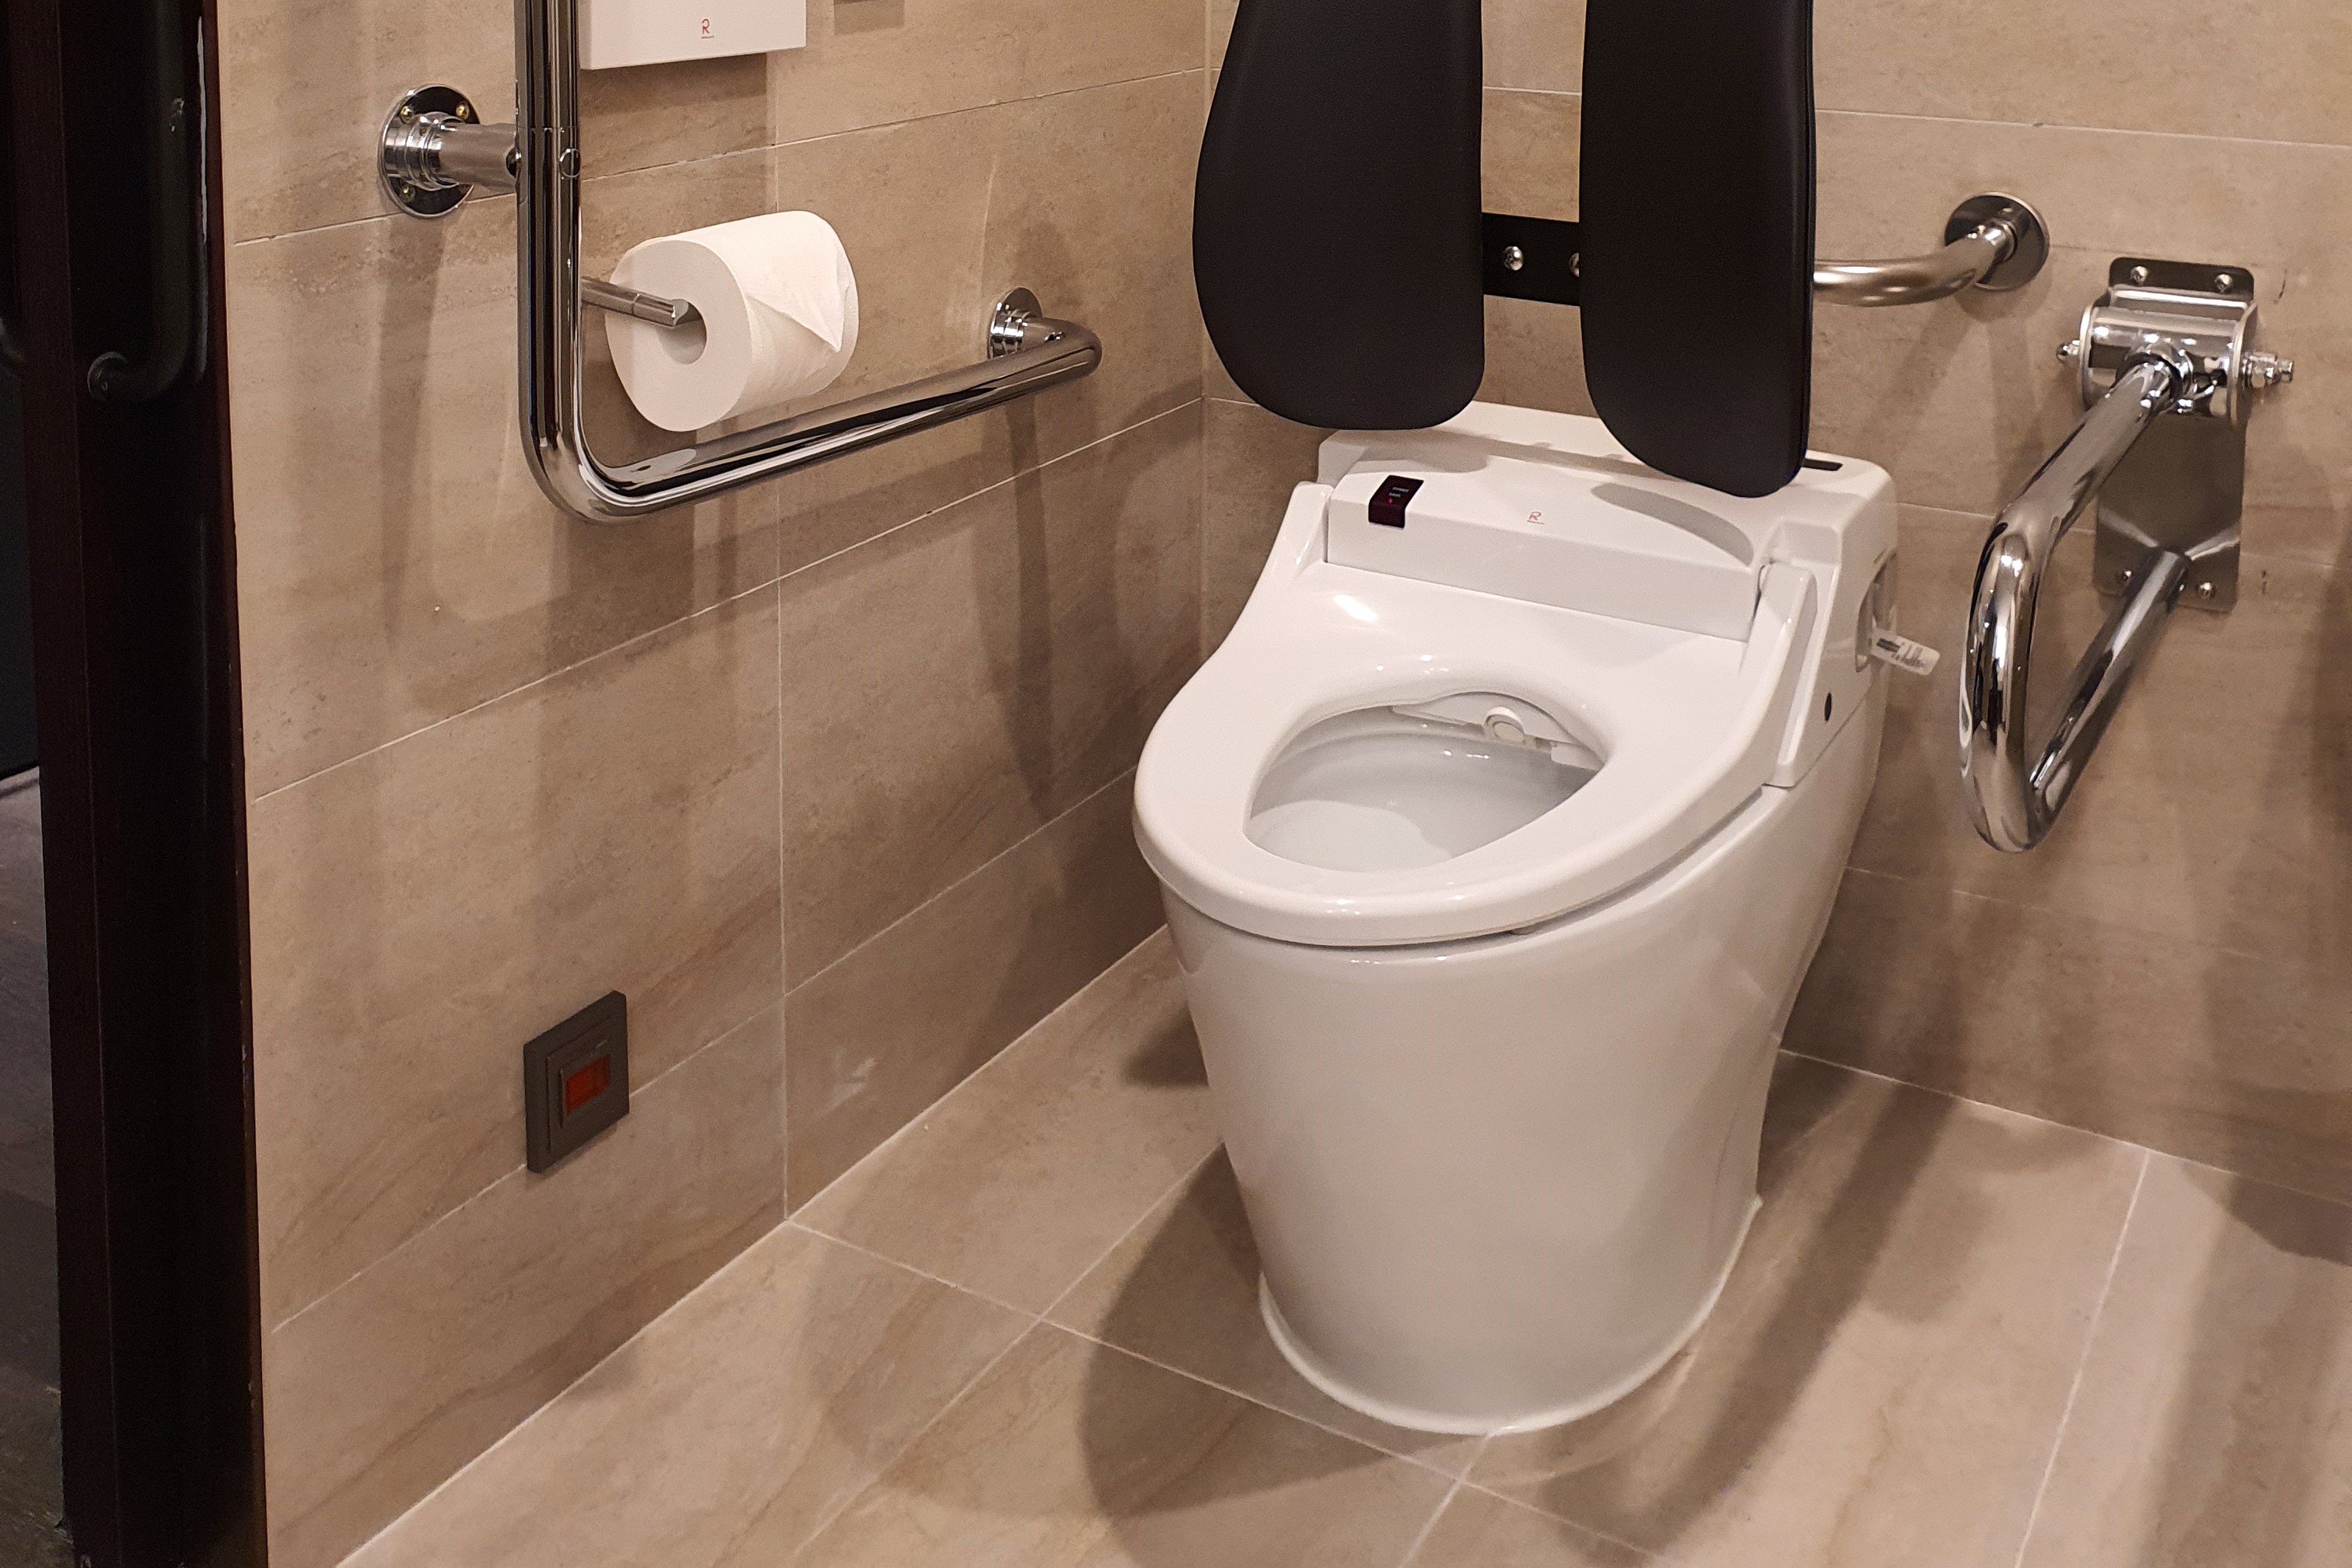 Disabled Rooms.0 : Toilet with grab bars and backrests